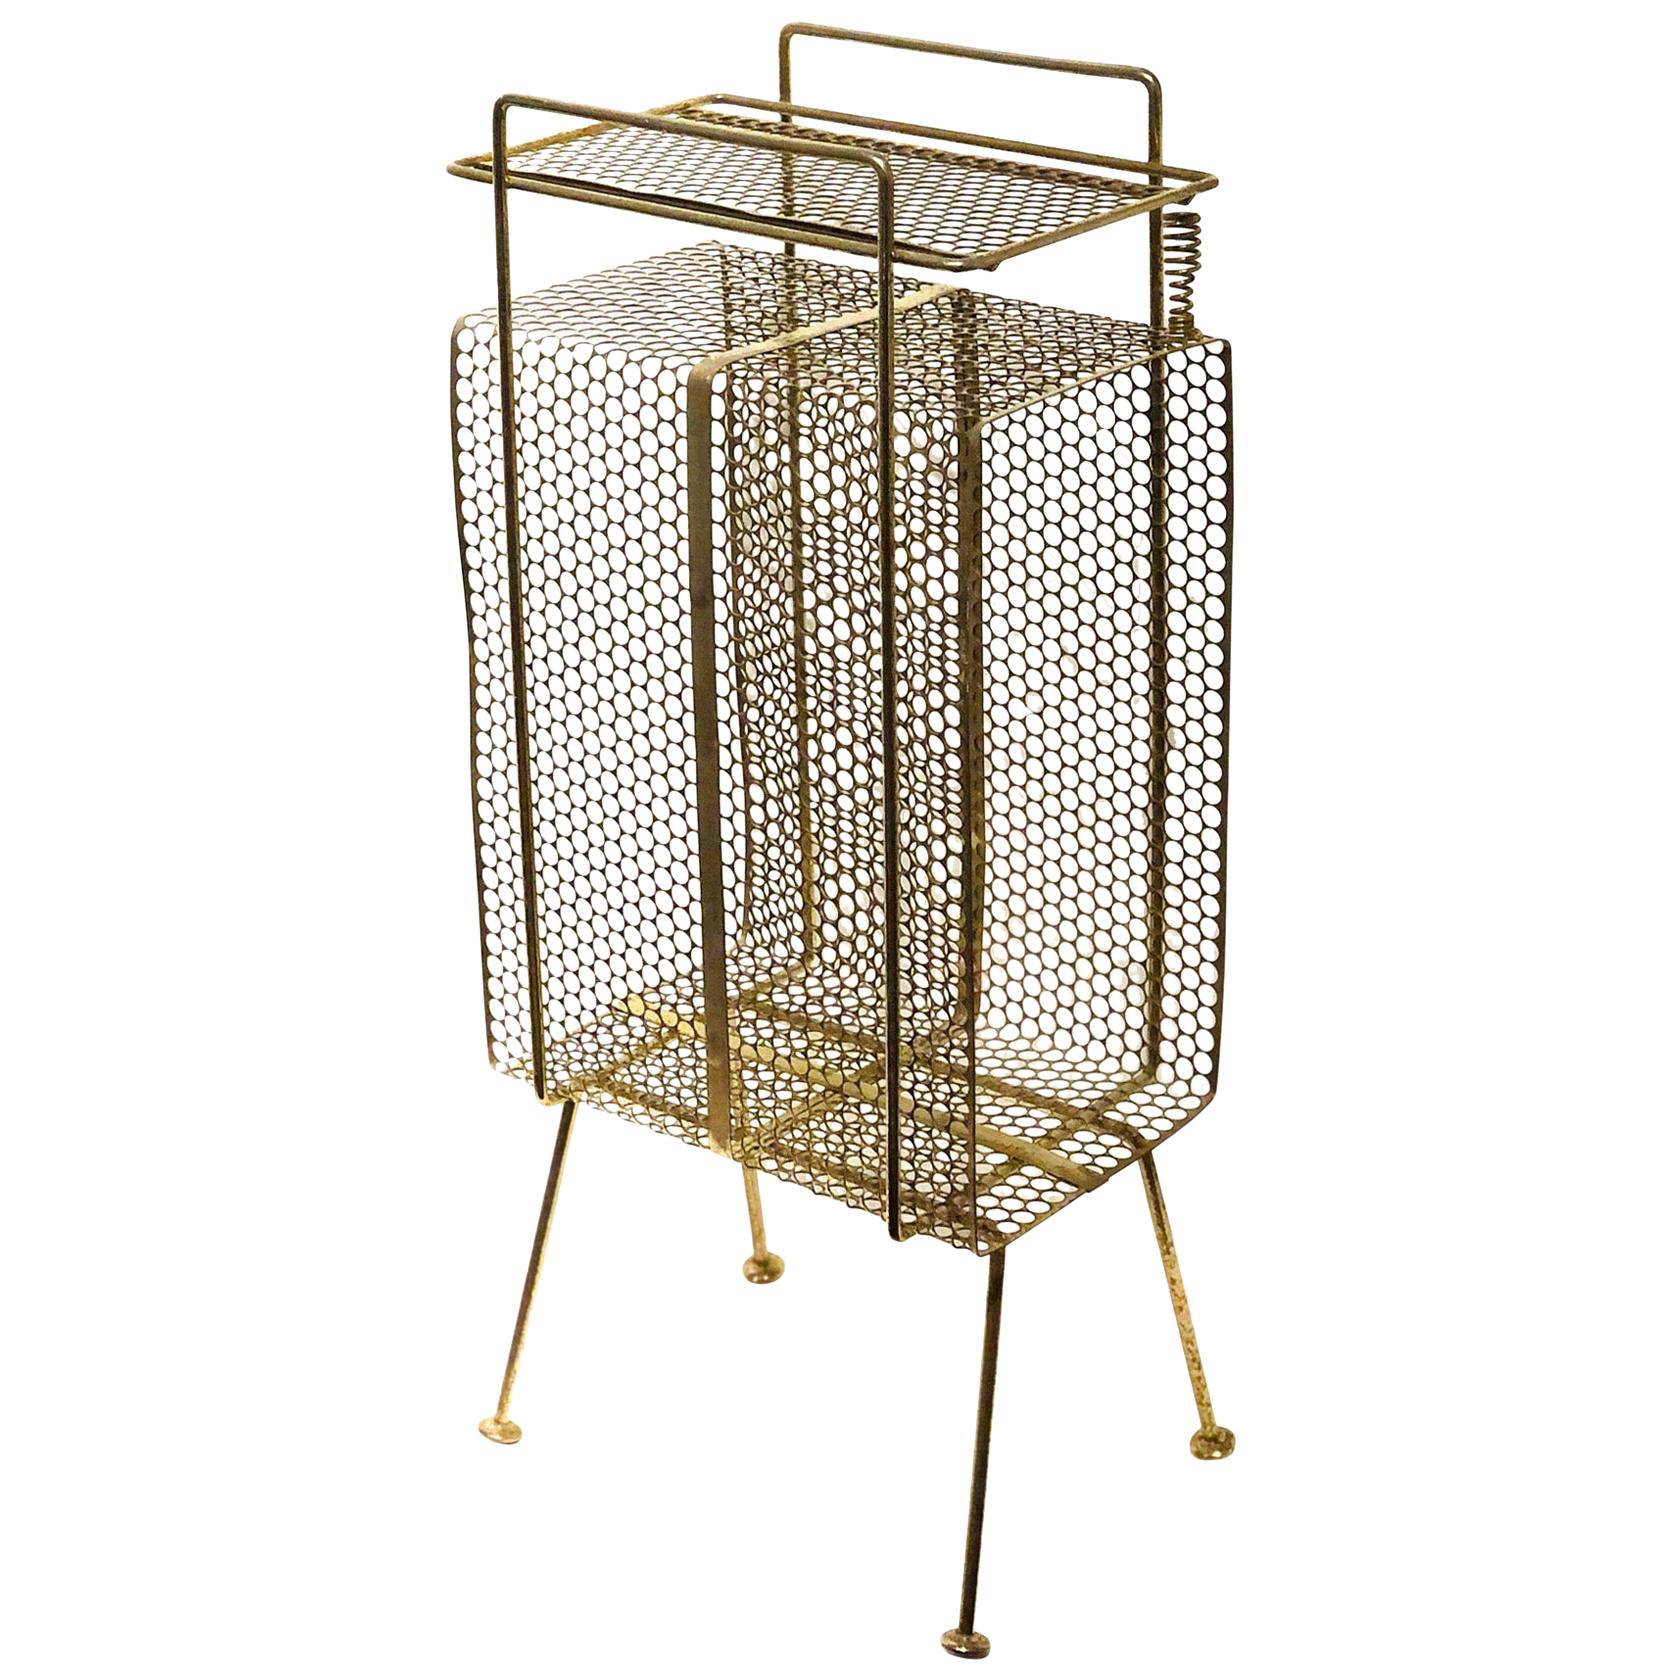 The 1950s Classic midcentury, atomic age era stand/rack original used for the telephone, phone directory, this one its in brass finish with some wear light rust and patina due to age. Designed by Richard Galef for Ravenware.